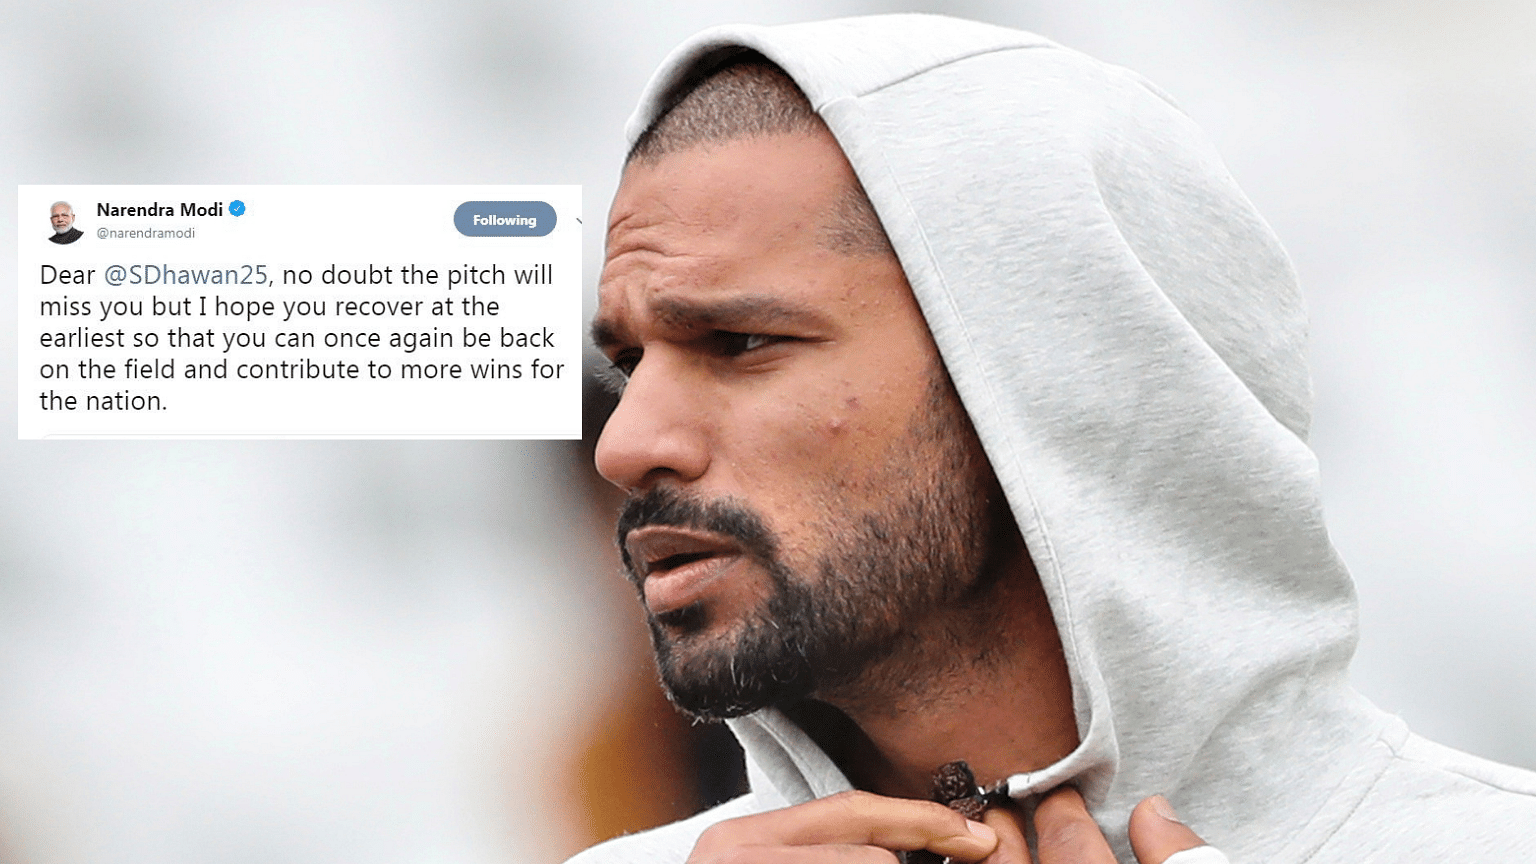 Dhawan had suffered the injury after being hit by a Pat Cummins delivery during his 109-ball knock of 117 against Australia on June 9.